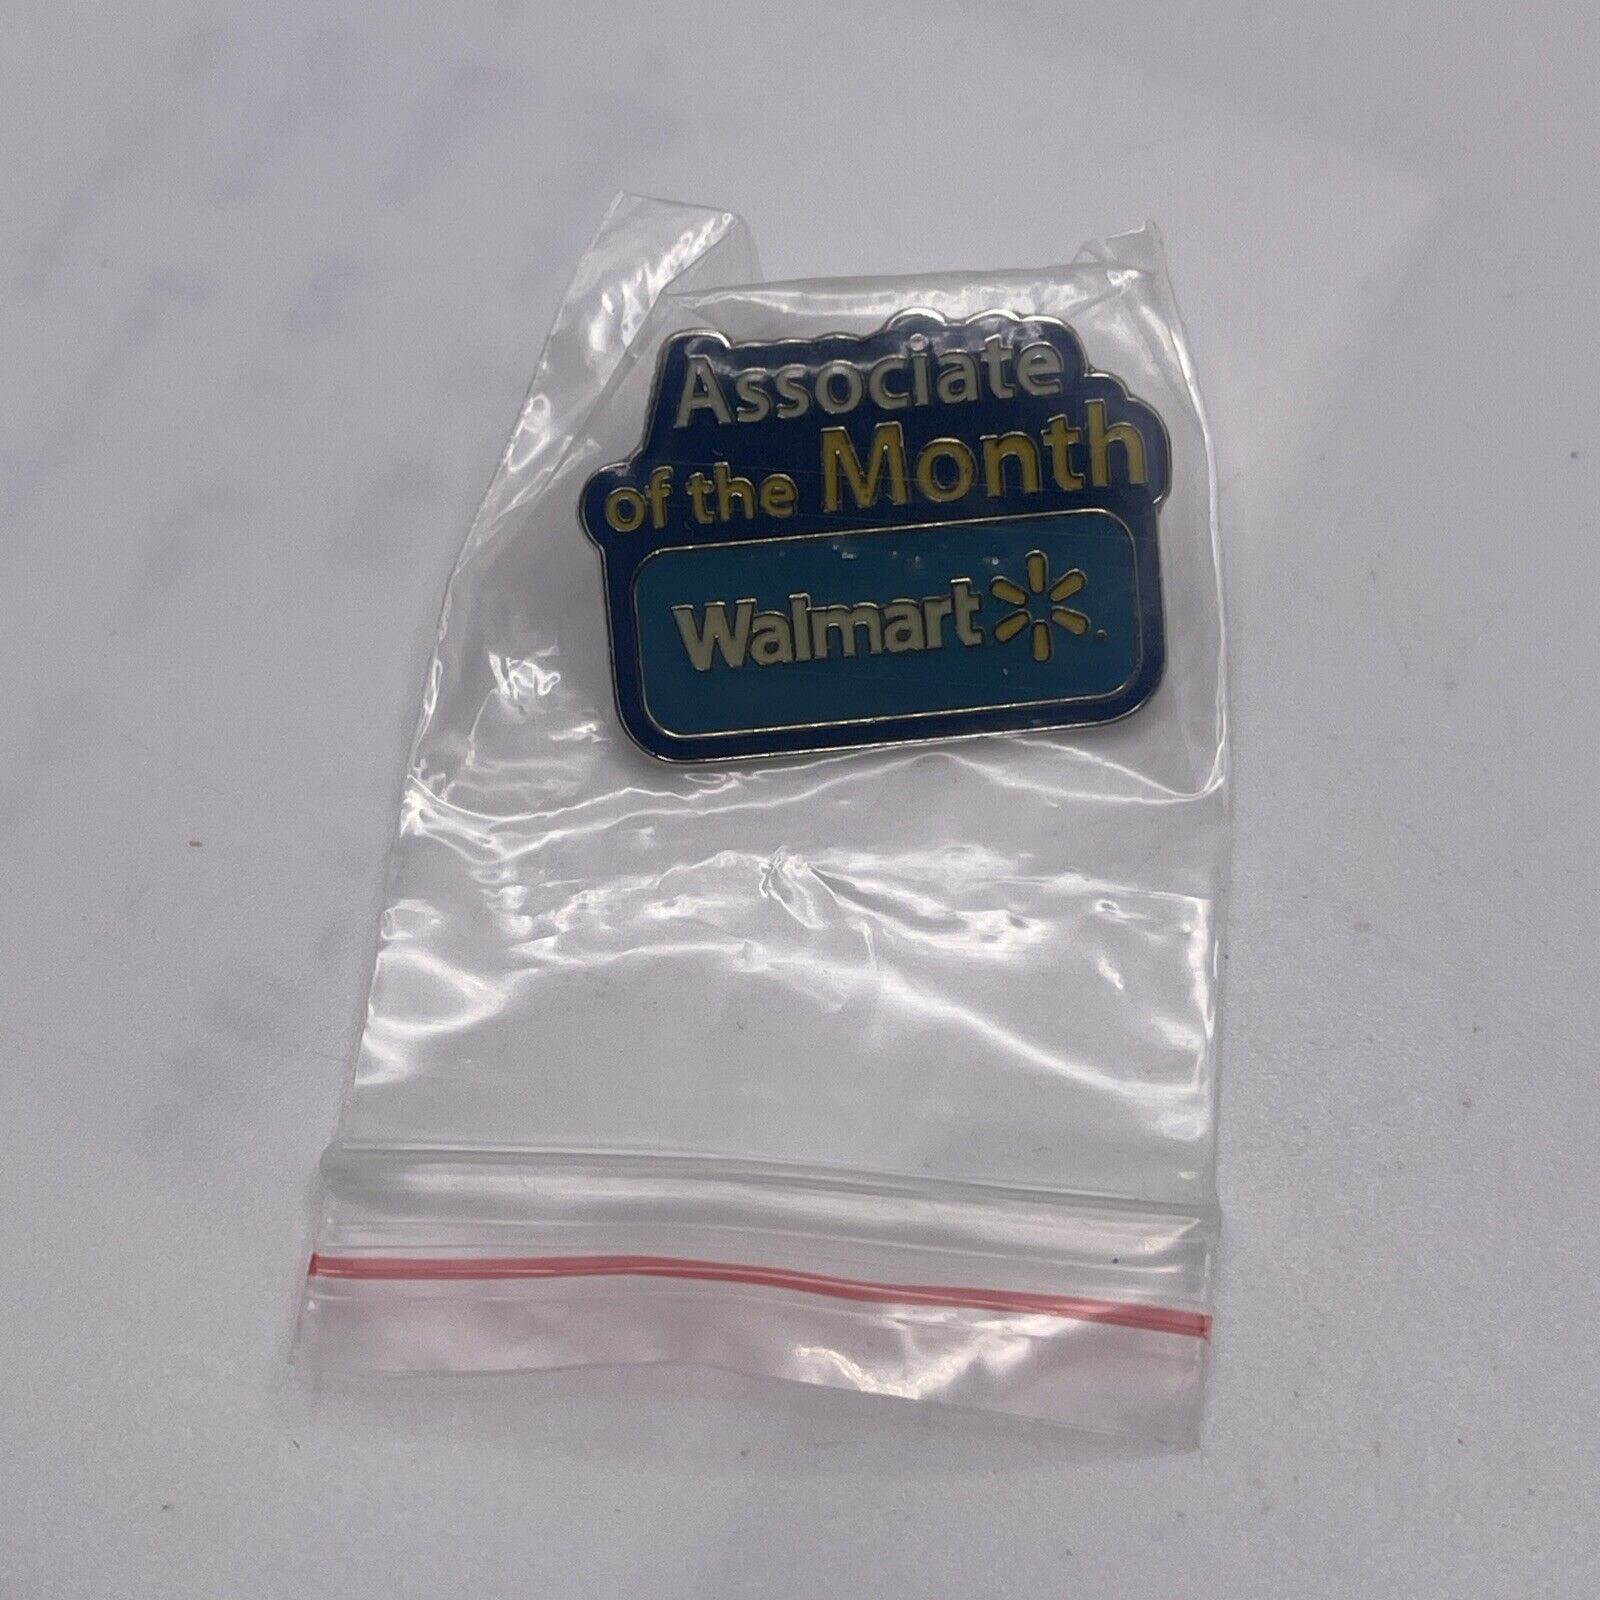 Brand New WALMART ASSOCIATE OF THE MONTH Collectible LAPEL LANYARD PIN 2015 🔥